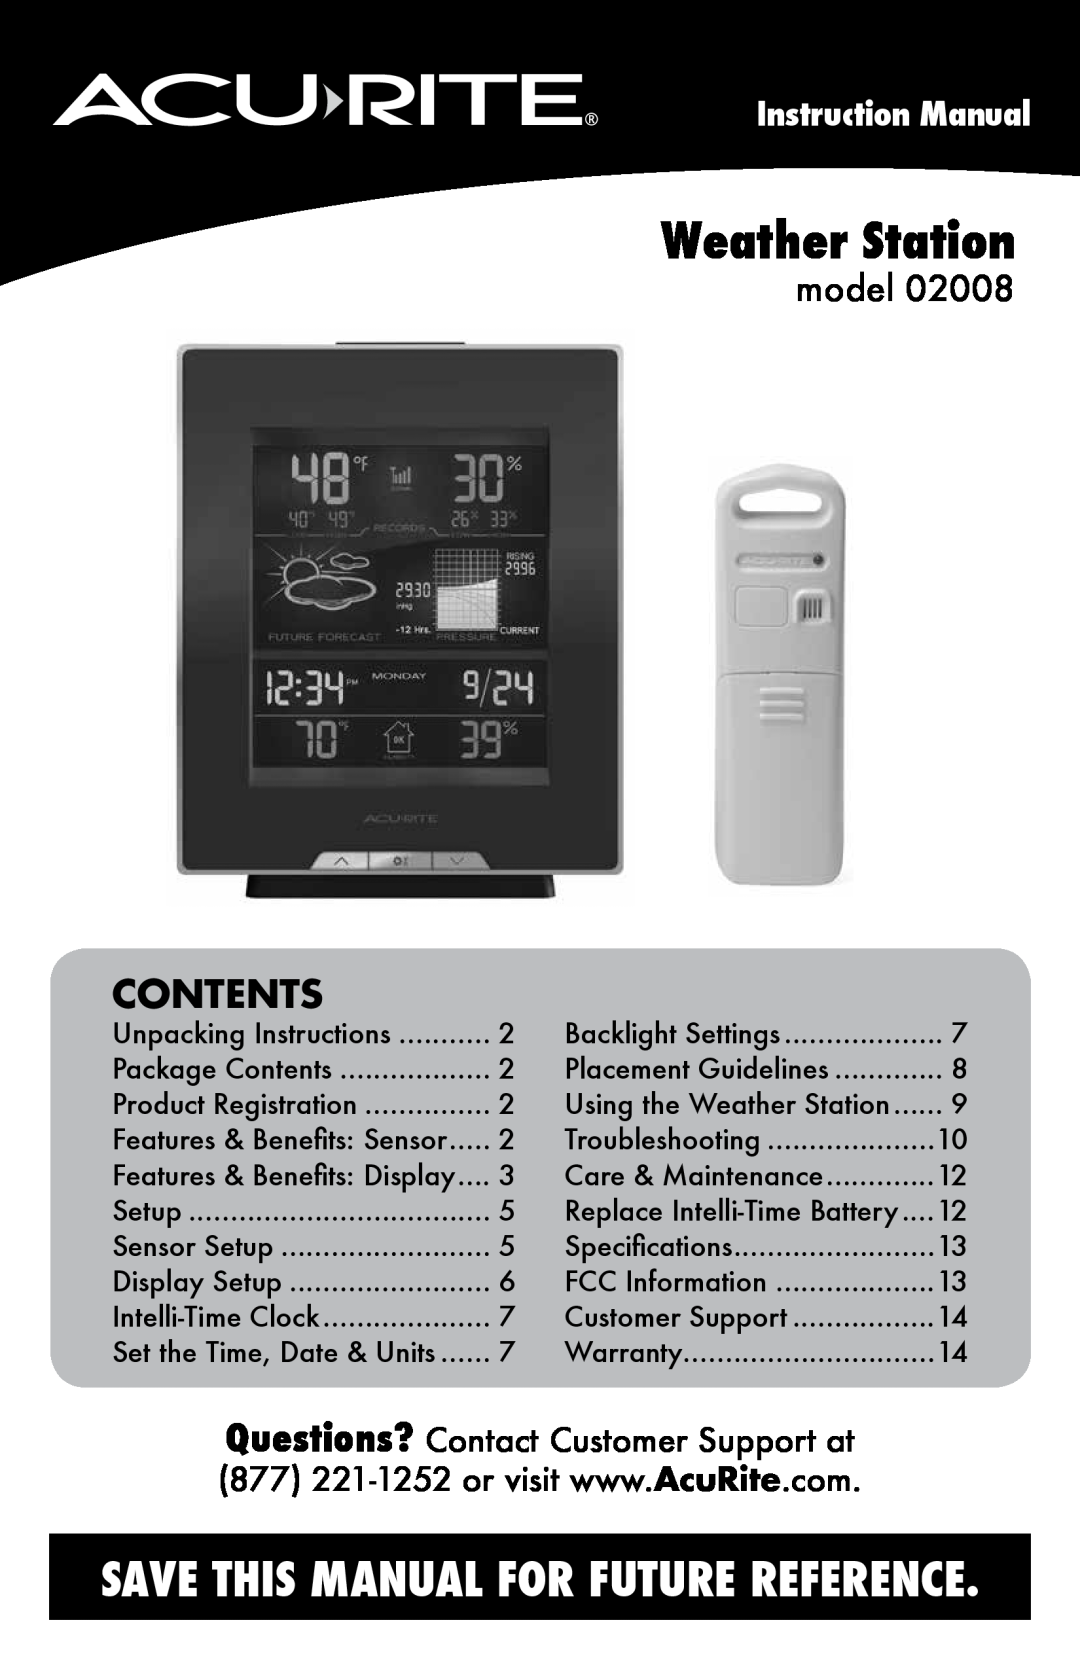 Acu-Rite 2008 instruction manual Contents, model, Instruction Manual, Weather Station 